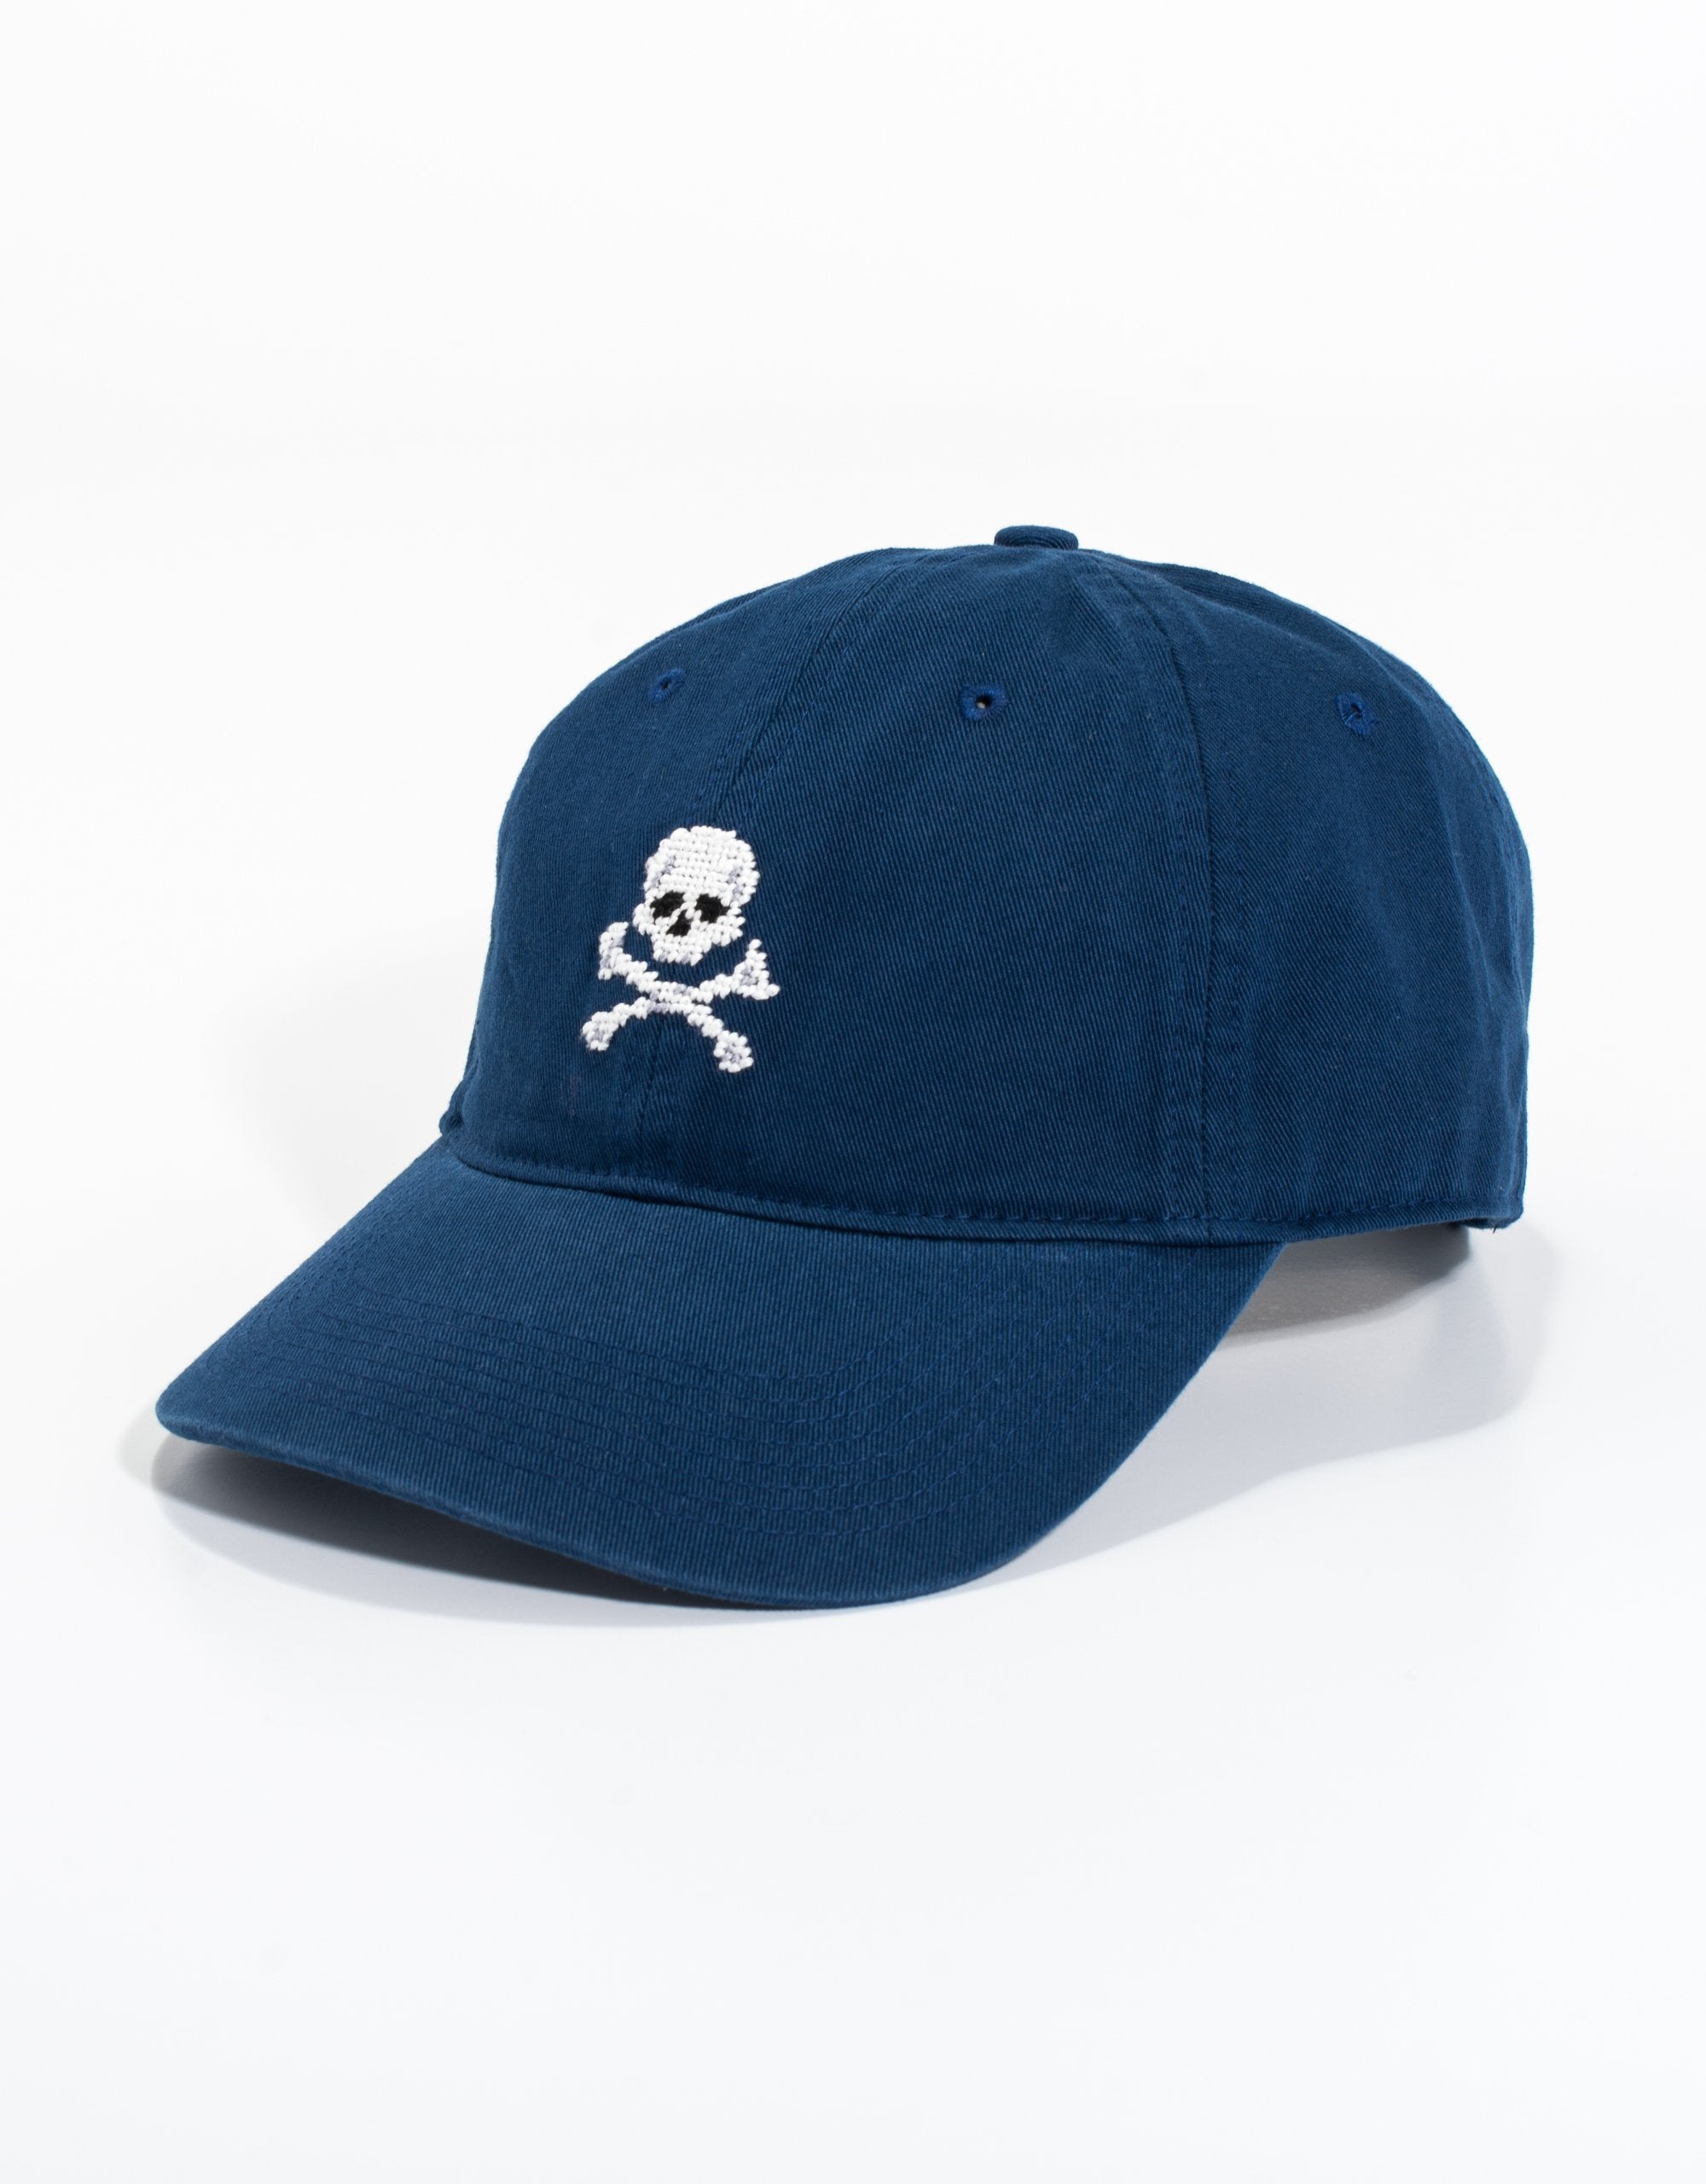 Needlepoint Hat - Navy Jolly Roger | Men's Dress Clothes & Accessories